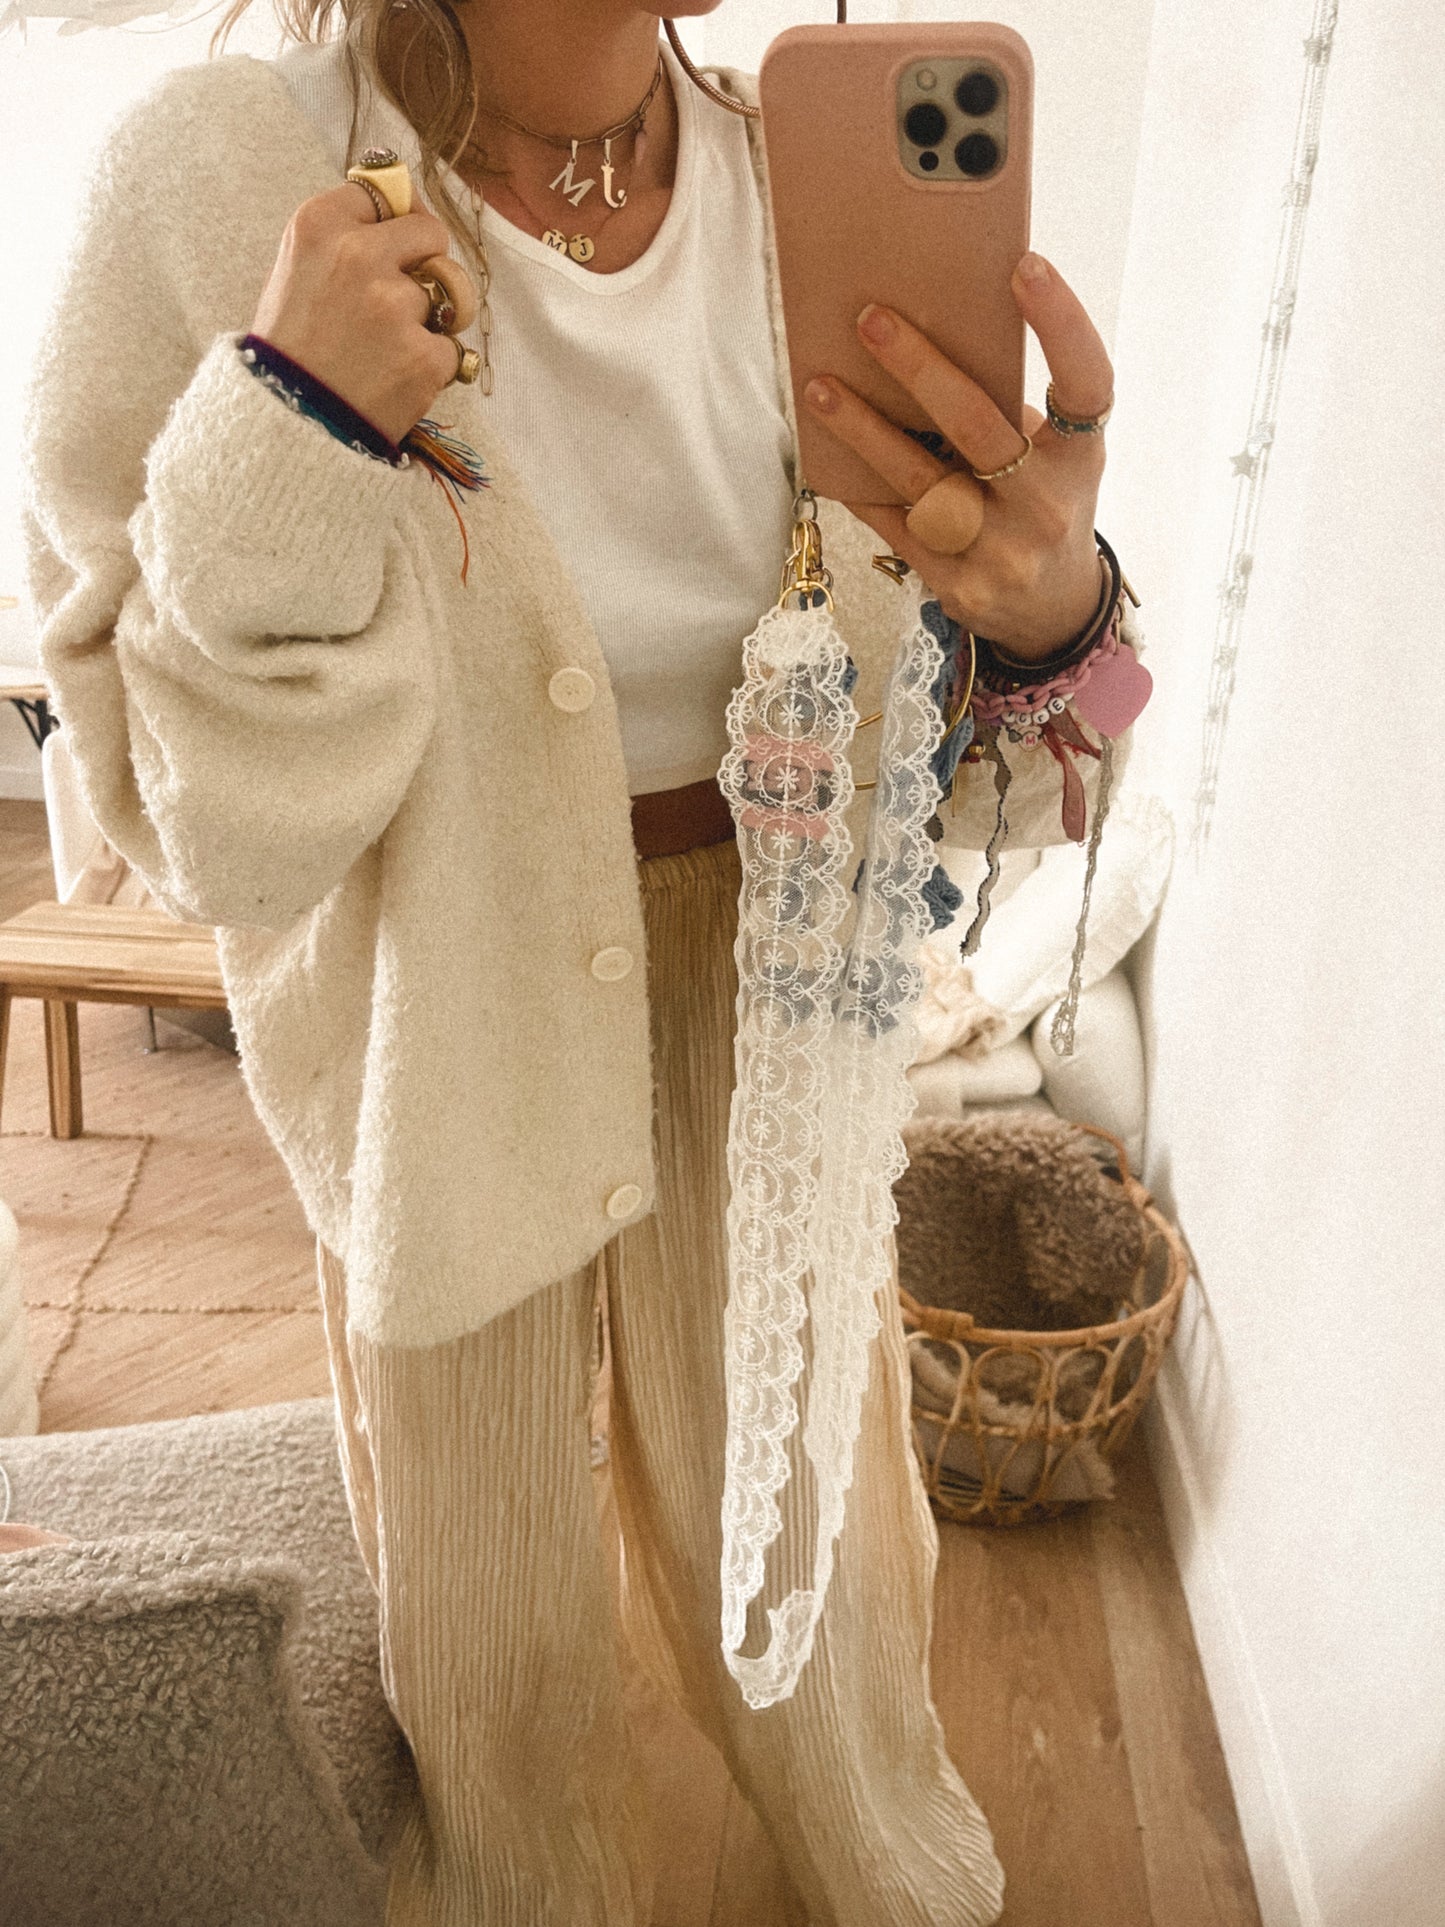 Malaga lace phone and bag necklace - dreamy white